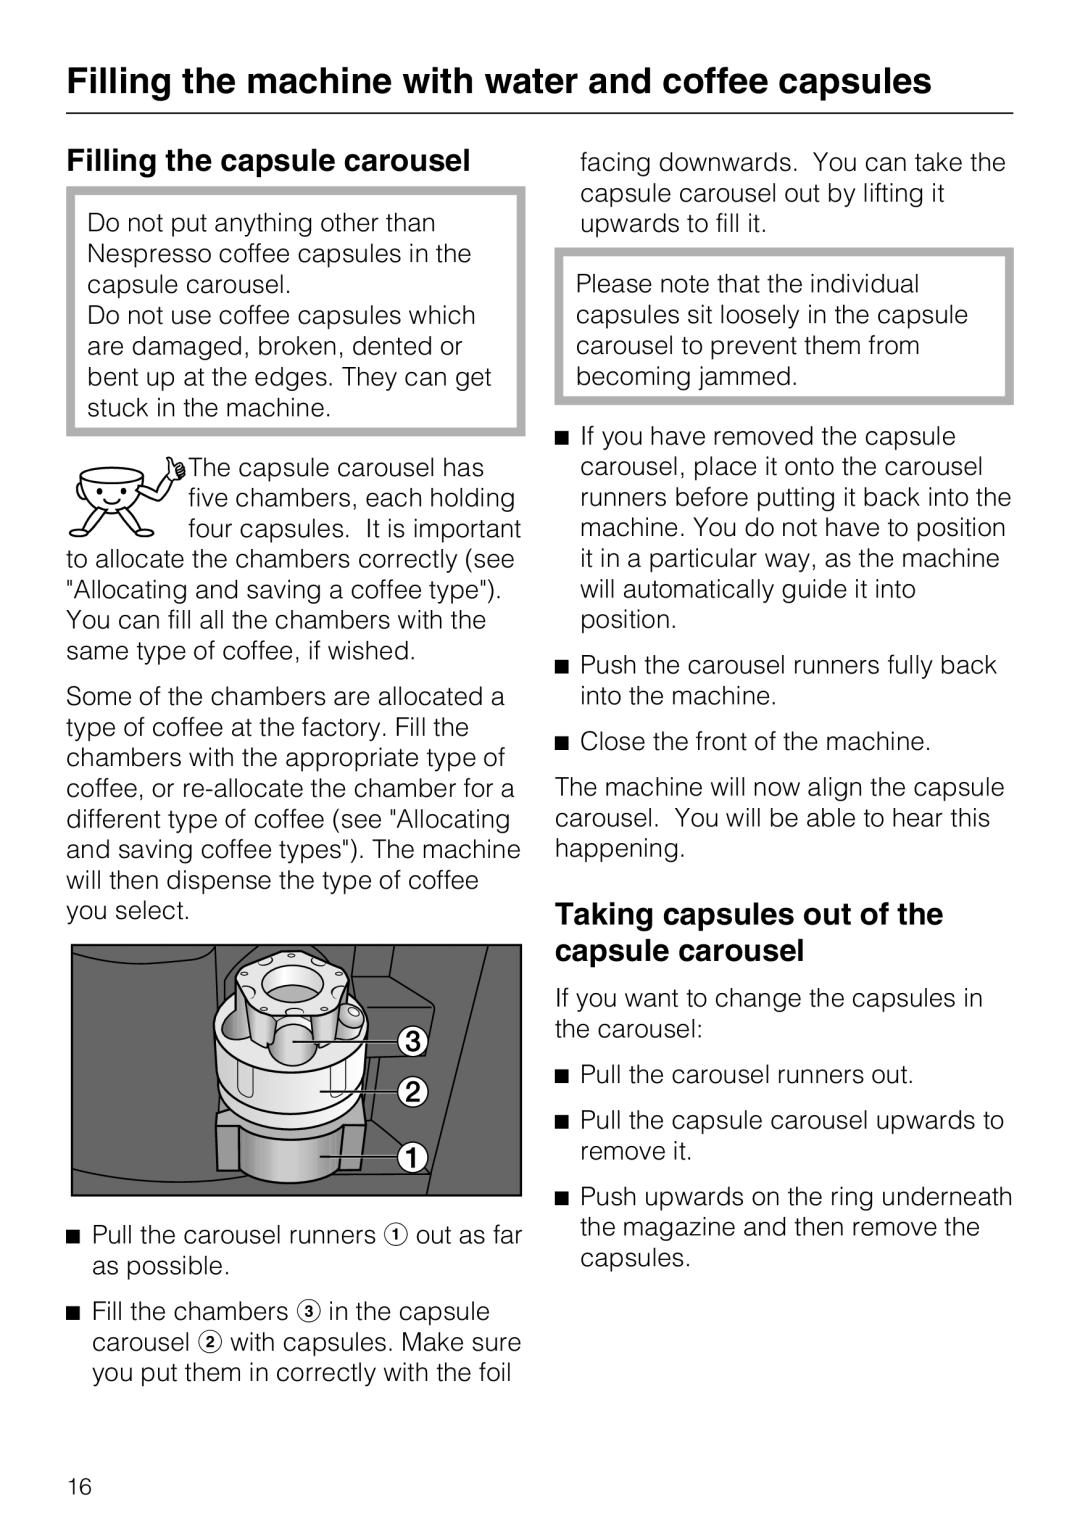 Miele CVA 3650 installation instructions Filling the capsule carousel, Taking capsules out of the capsule carousel 